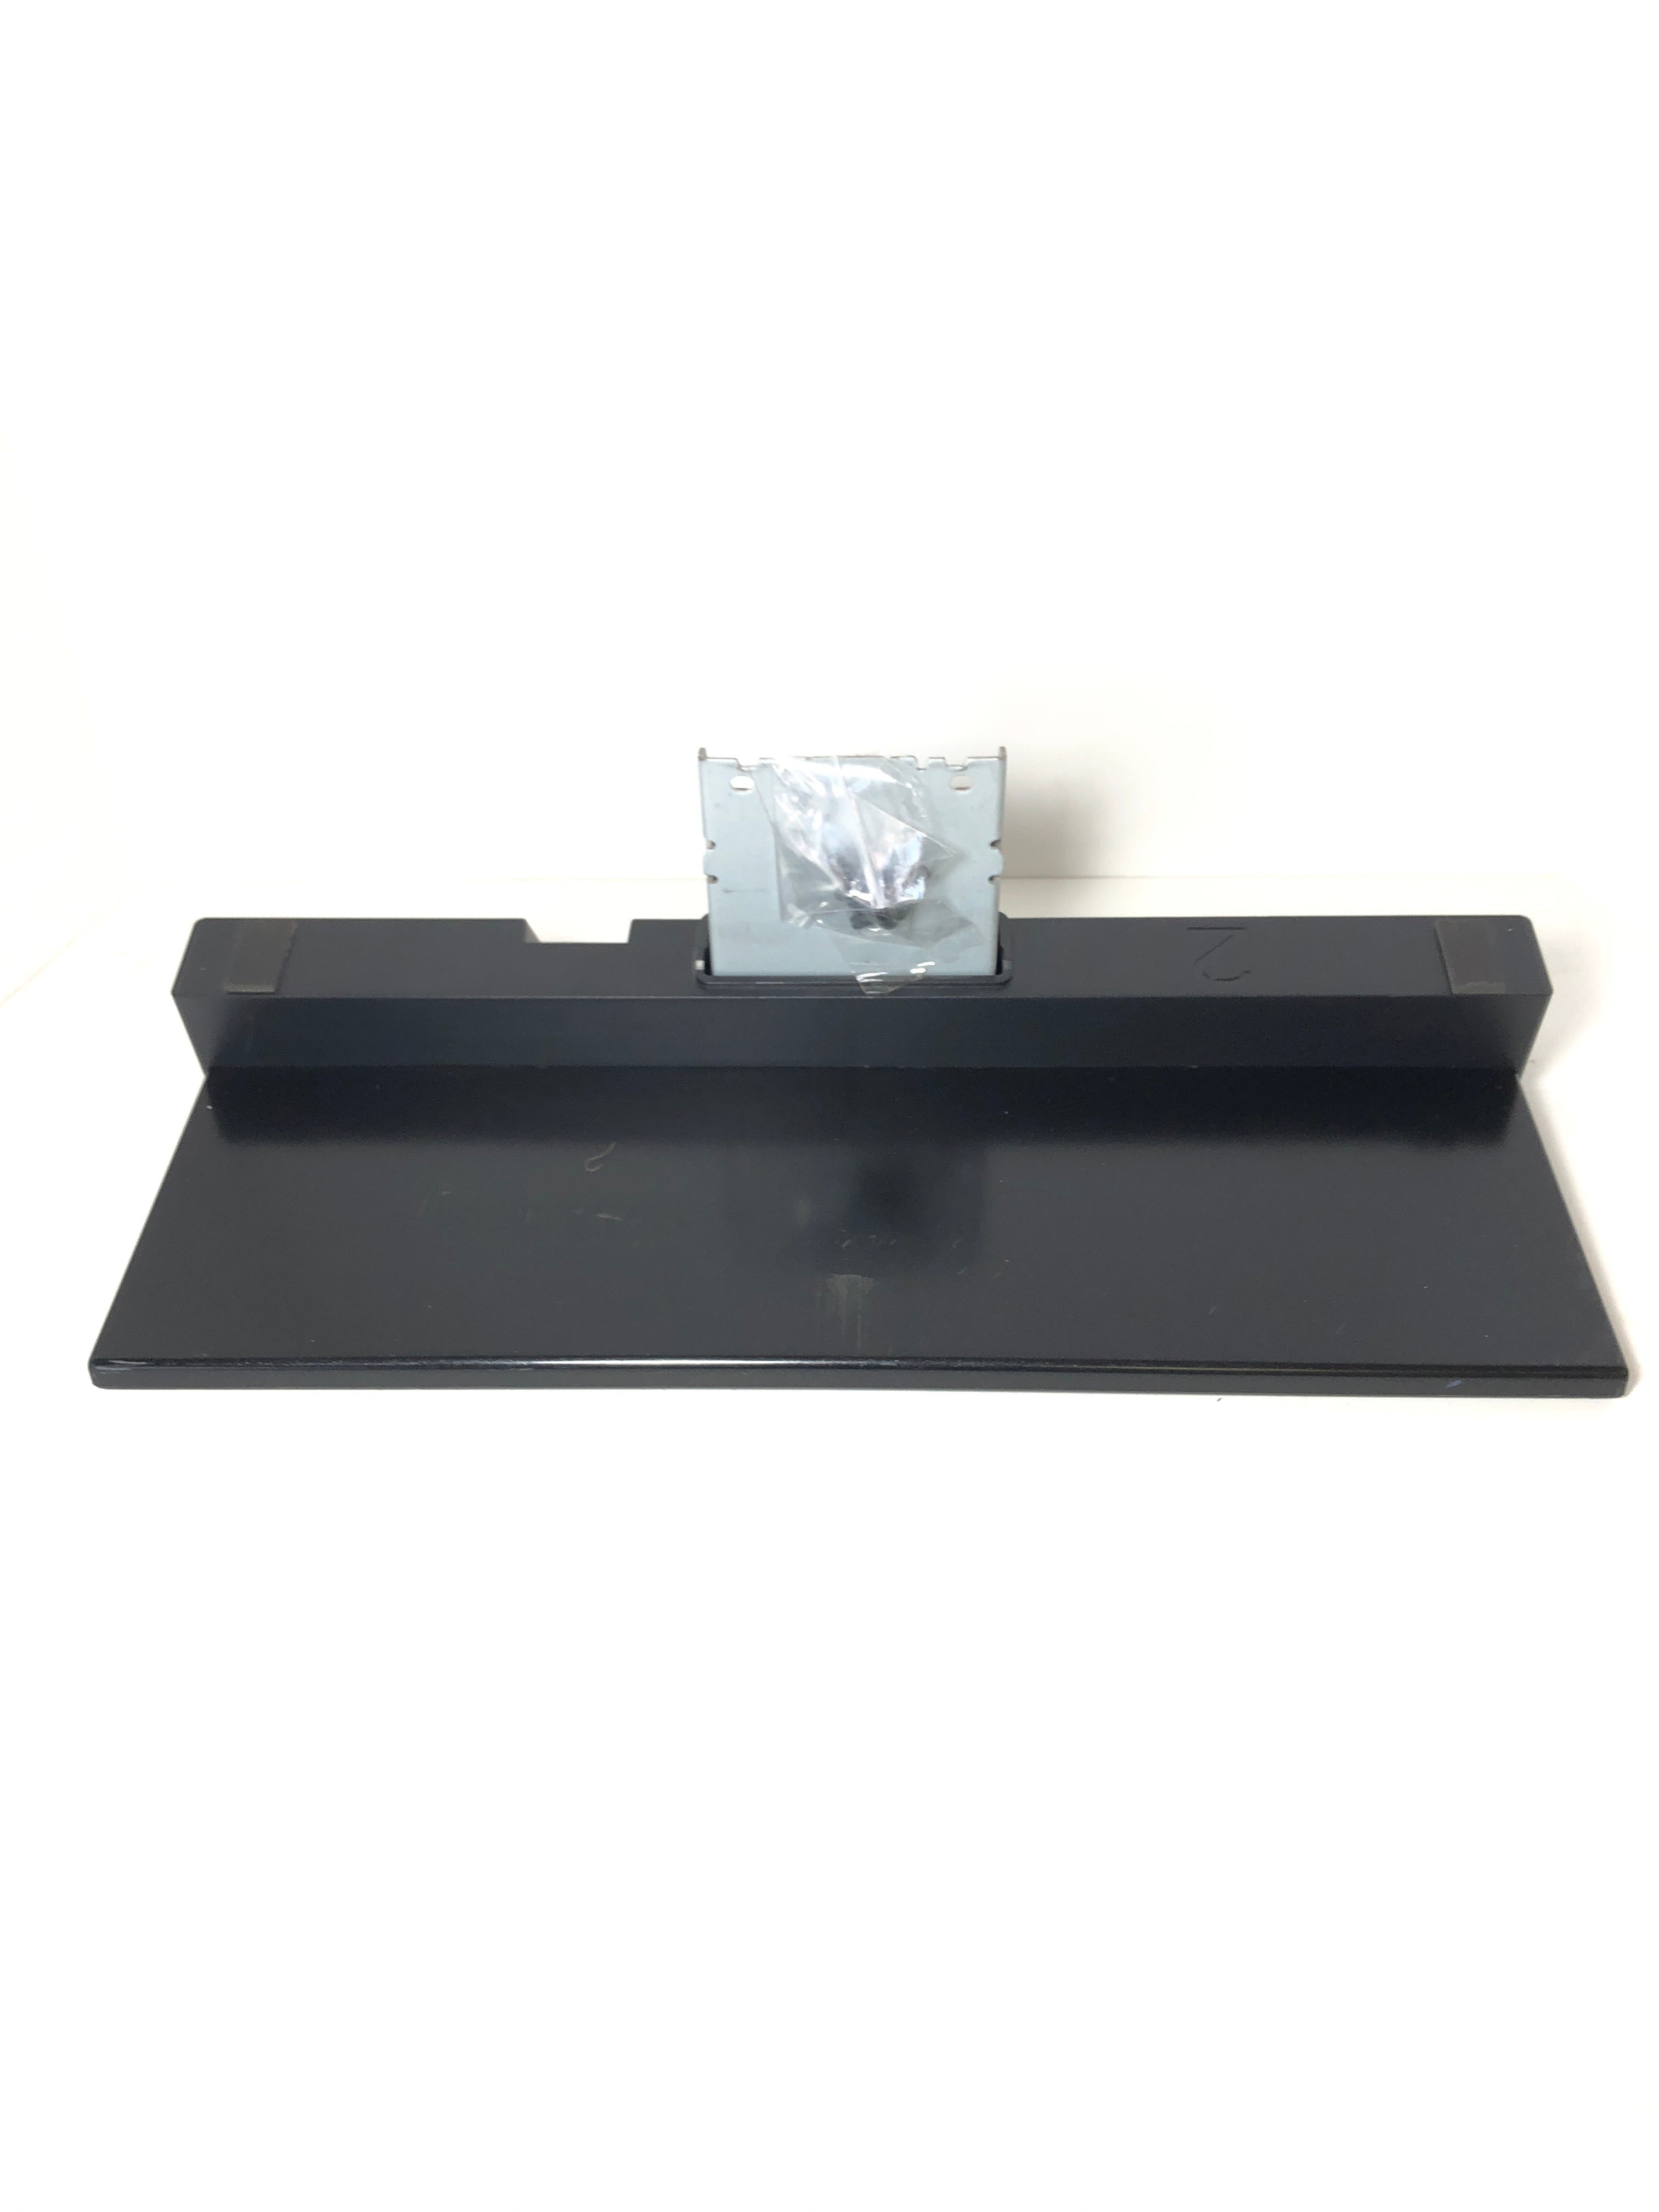 Sony KDL-32XBR4 TV Stand/Base